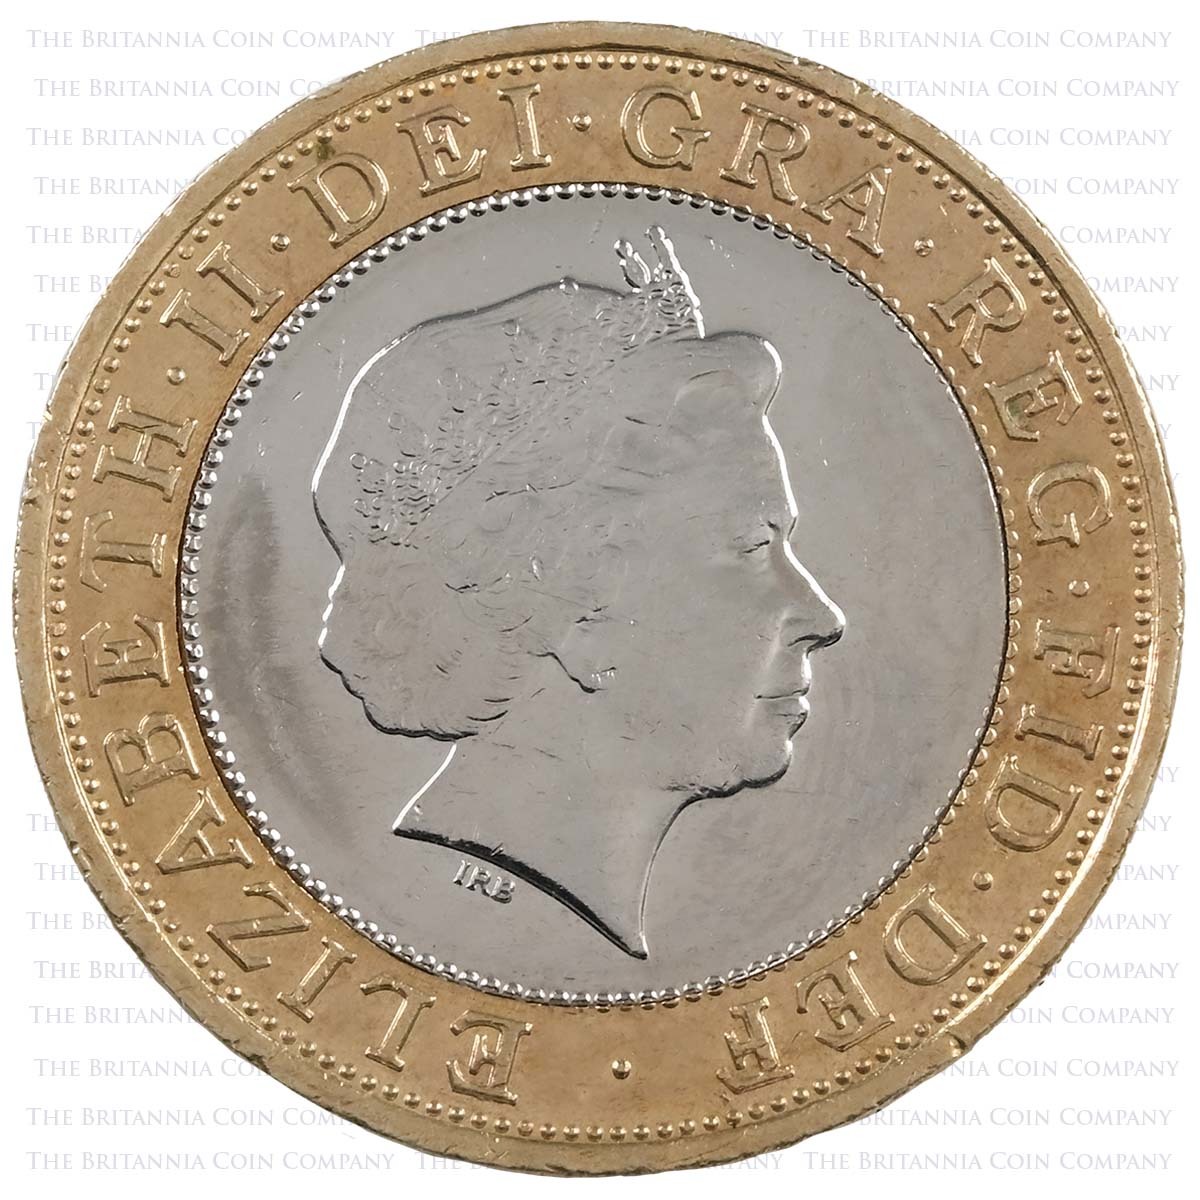 2009 Charles Darwin Circulated Two Pound Coin Obverse